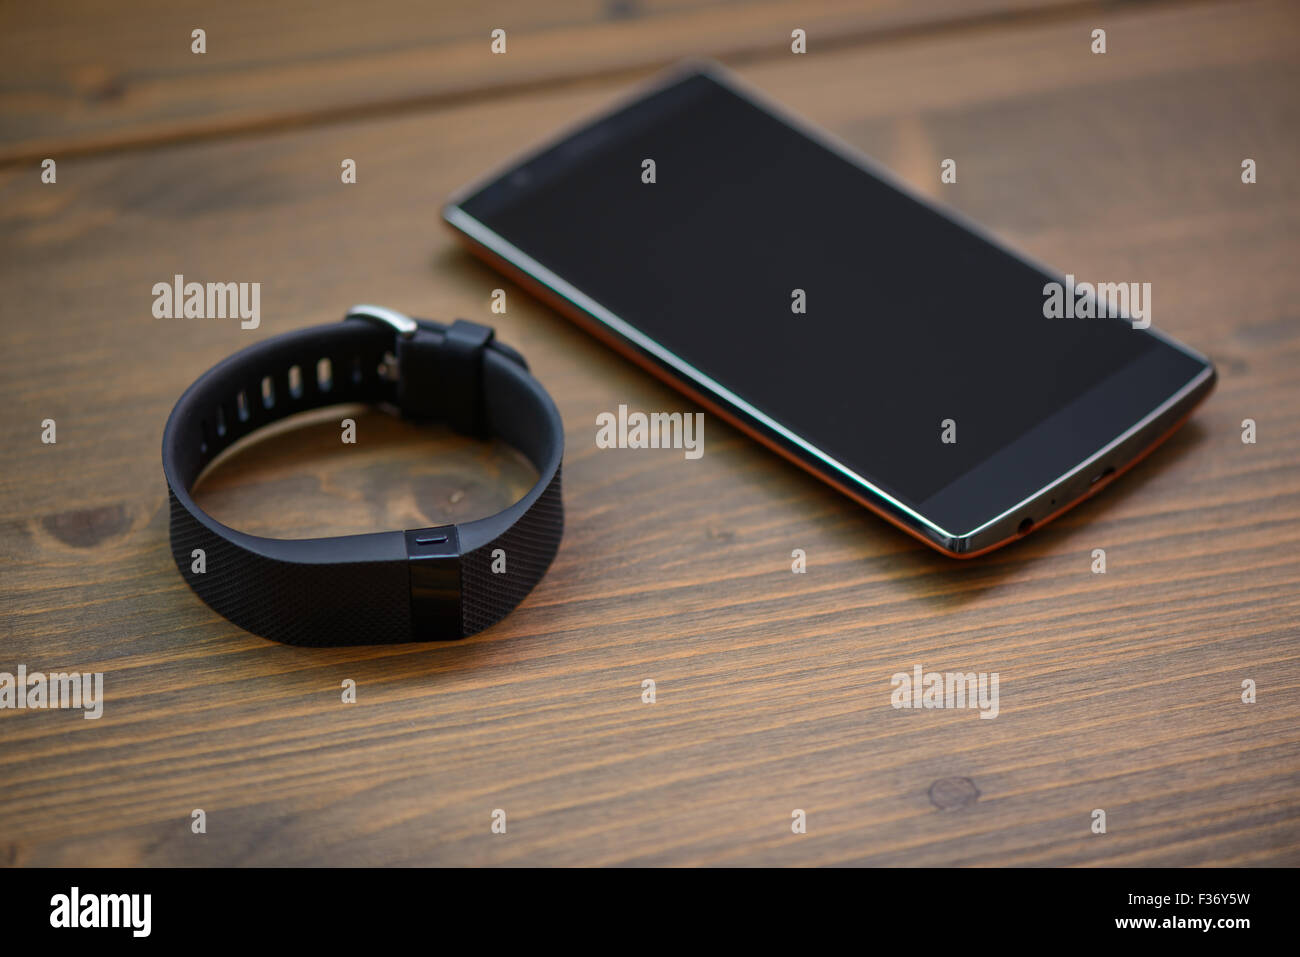 wearable device, wirst watch type Sports tracker and smart phone on a wooden board Stock Photo